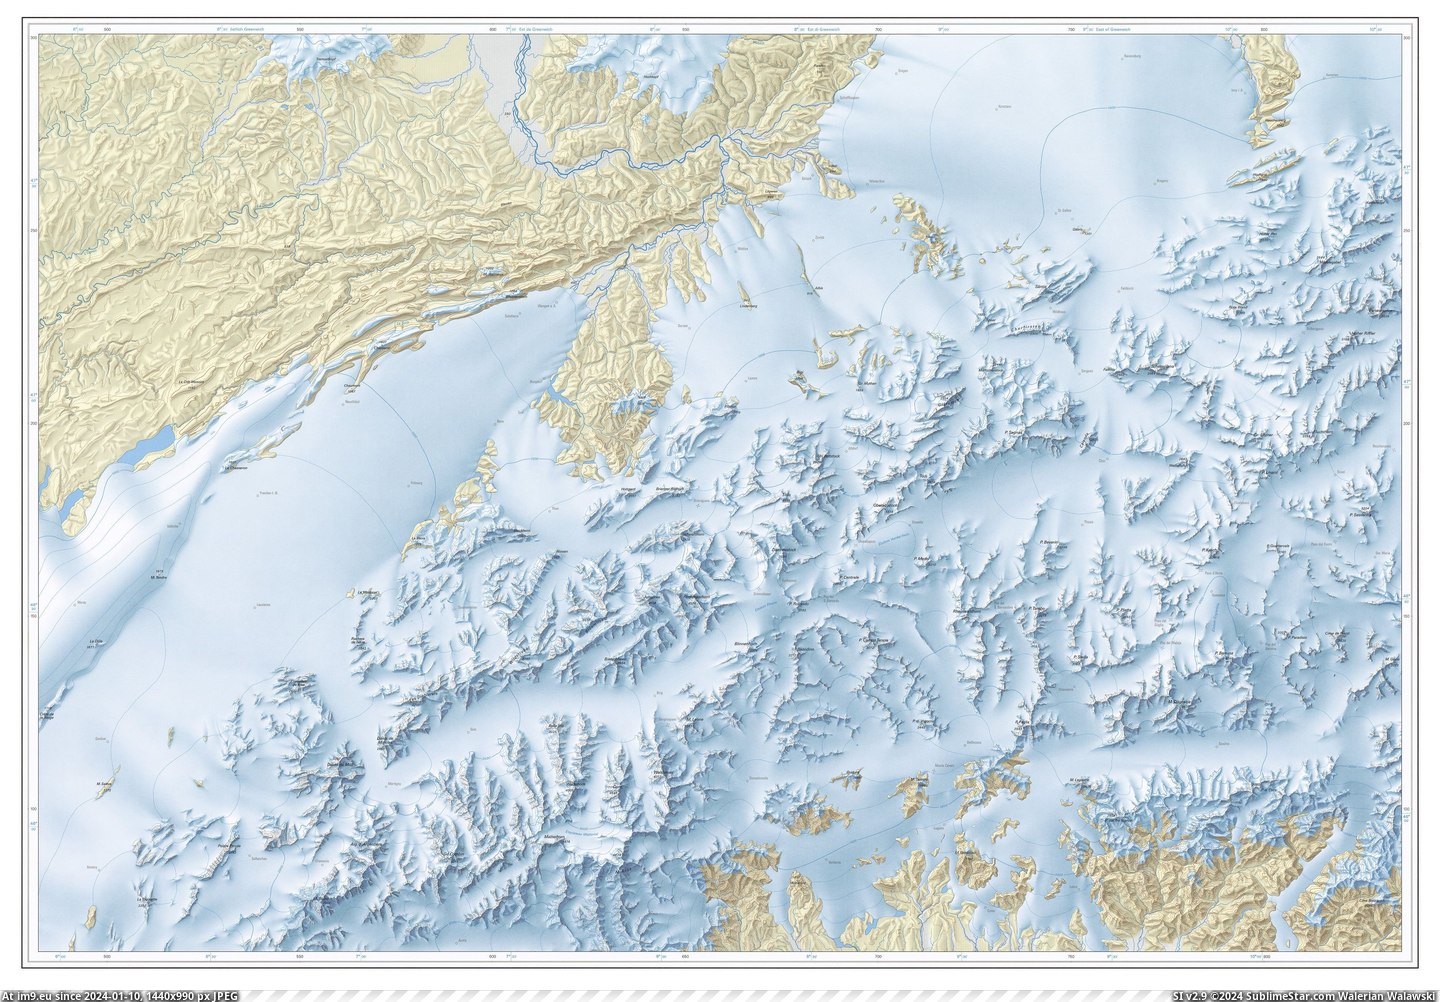 #Source #Switzerland #Interactive #Larger #Versions #Swiss #Maximum #Glacial [Mapporn] Switzerland during the last glacial maximum. Larger and interactive versions in comments. [3735x2580] Source: Swiss Fe Pic. (Изображение из альбом My r/MAPS favs))